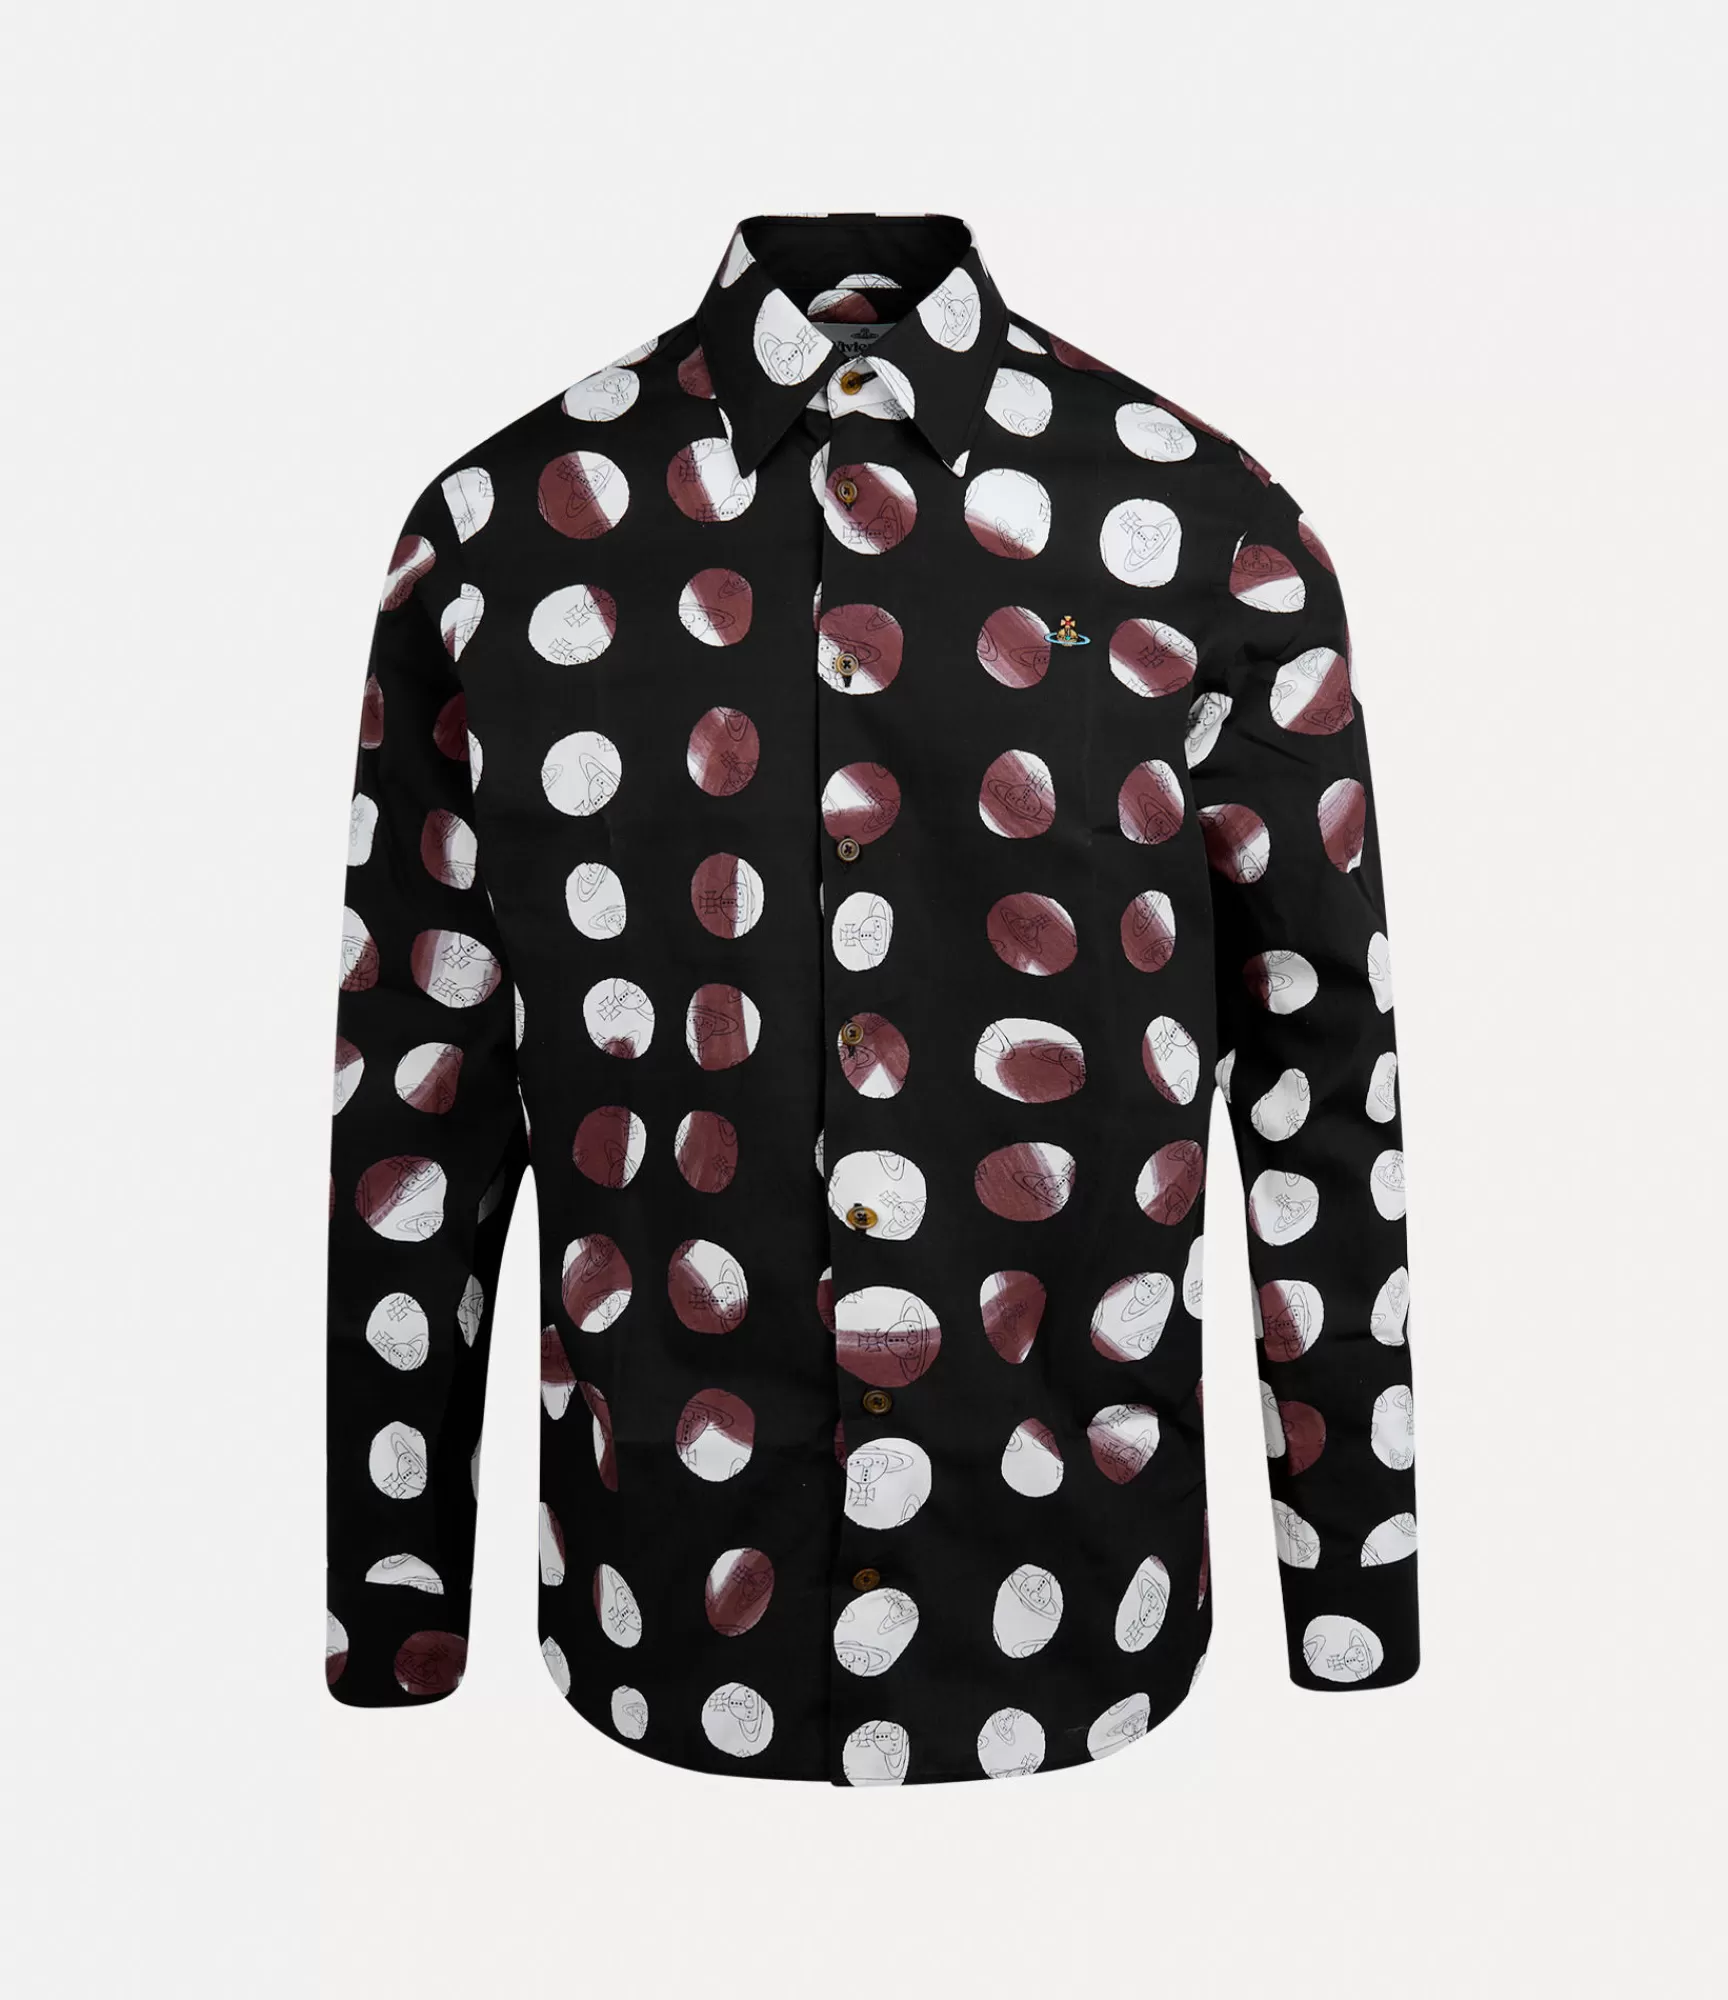 Vivienne Westwood Shirts*Ghost shirt Dots & Orbs